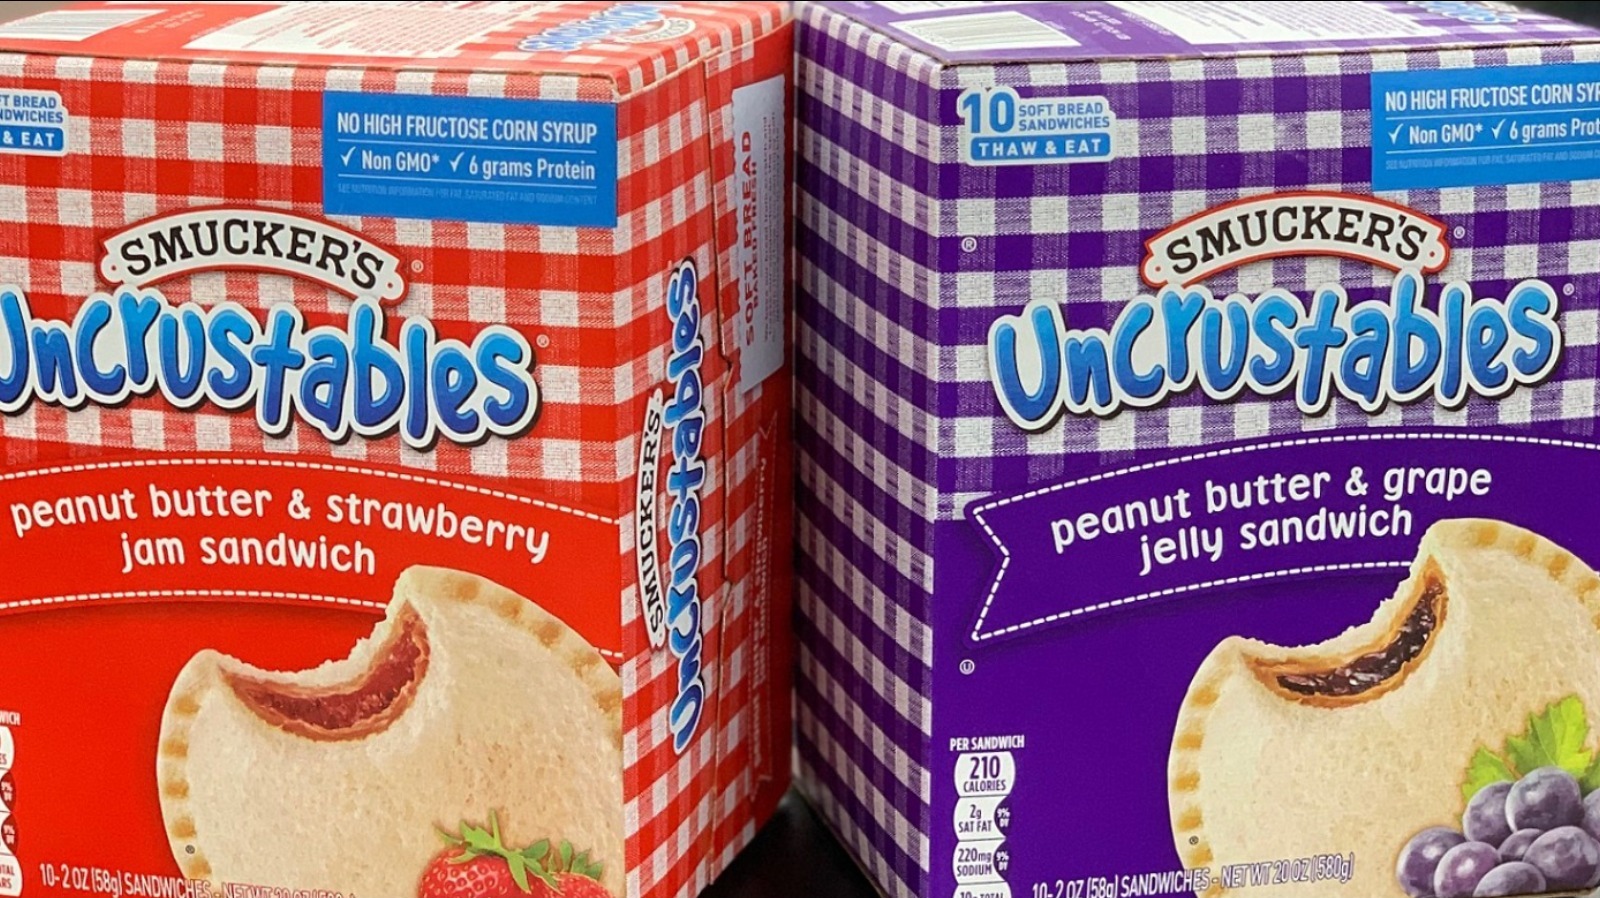 Smuckers Is Upgrading Its Uncrustables Lineup In A Big Way